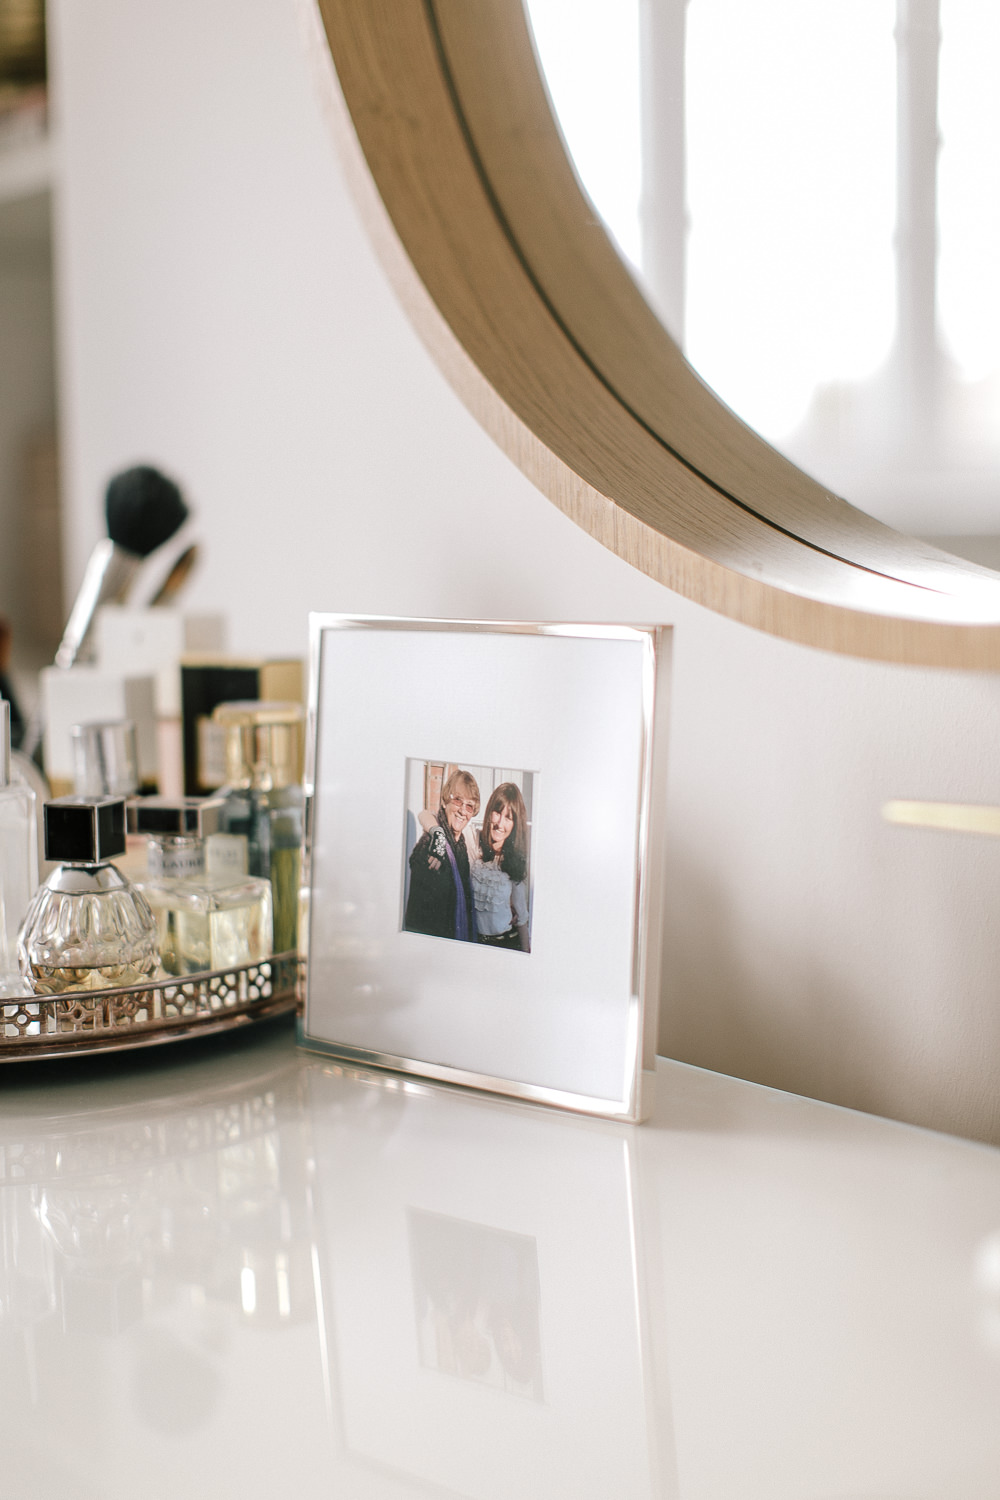 Dressing Table Area with Circular Wooden Oak Mirror | White Company Photo Frame